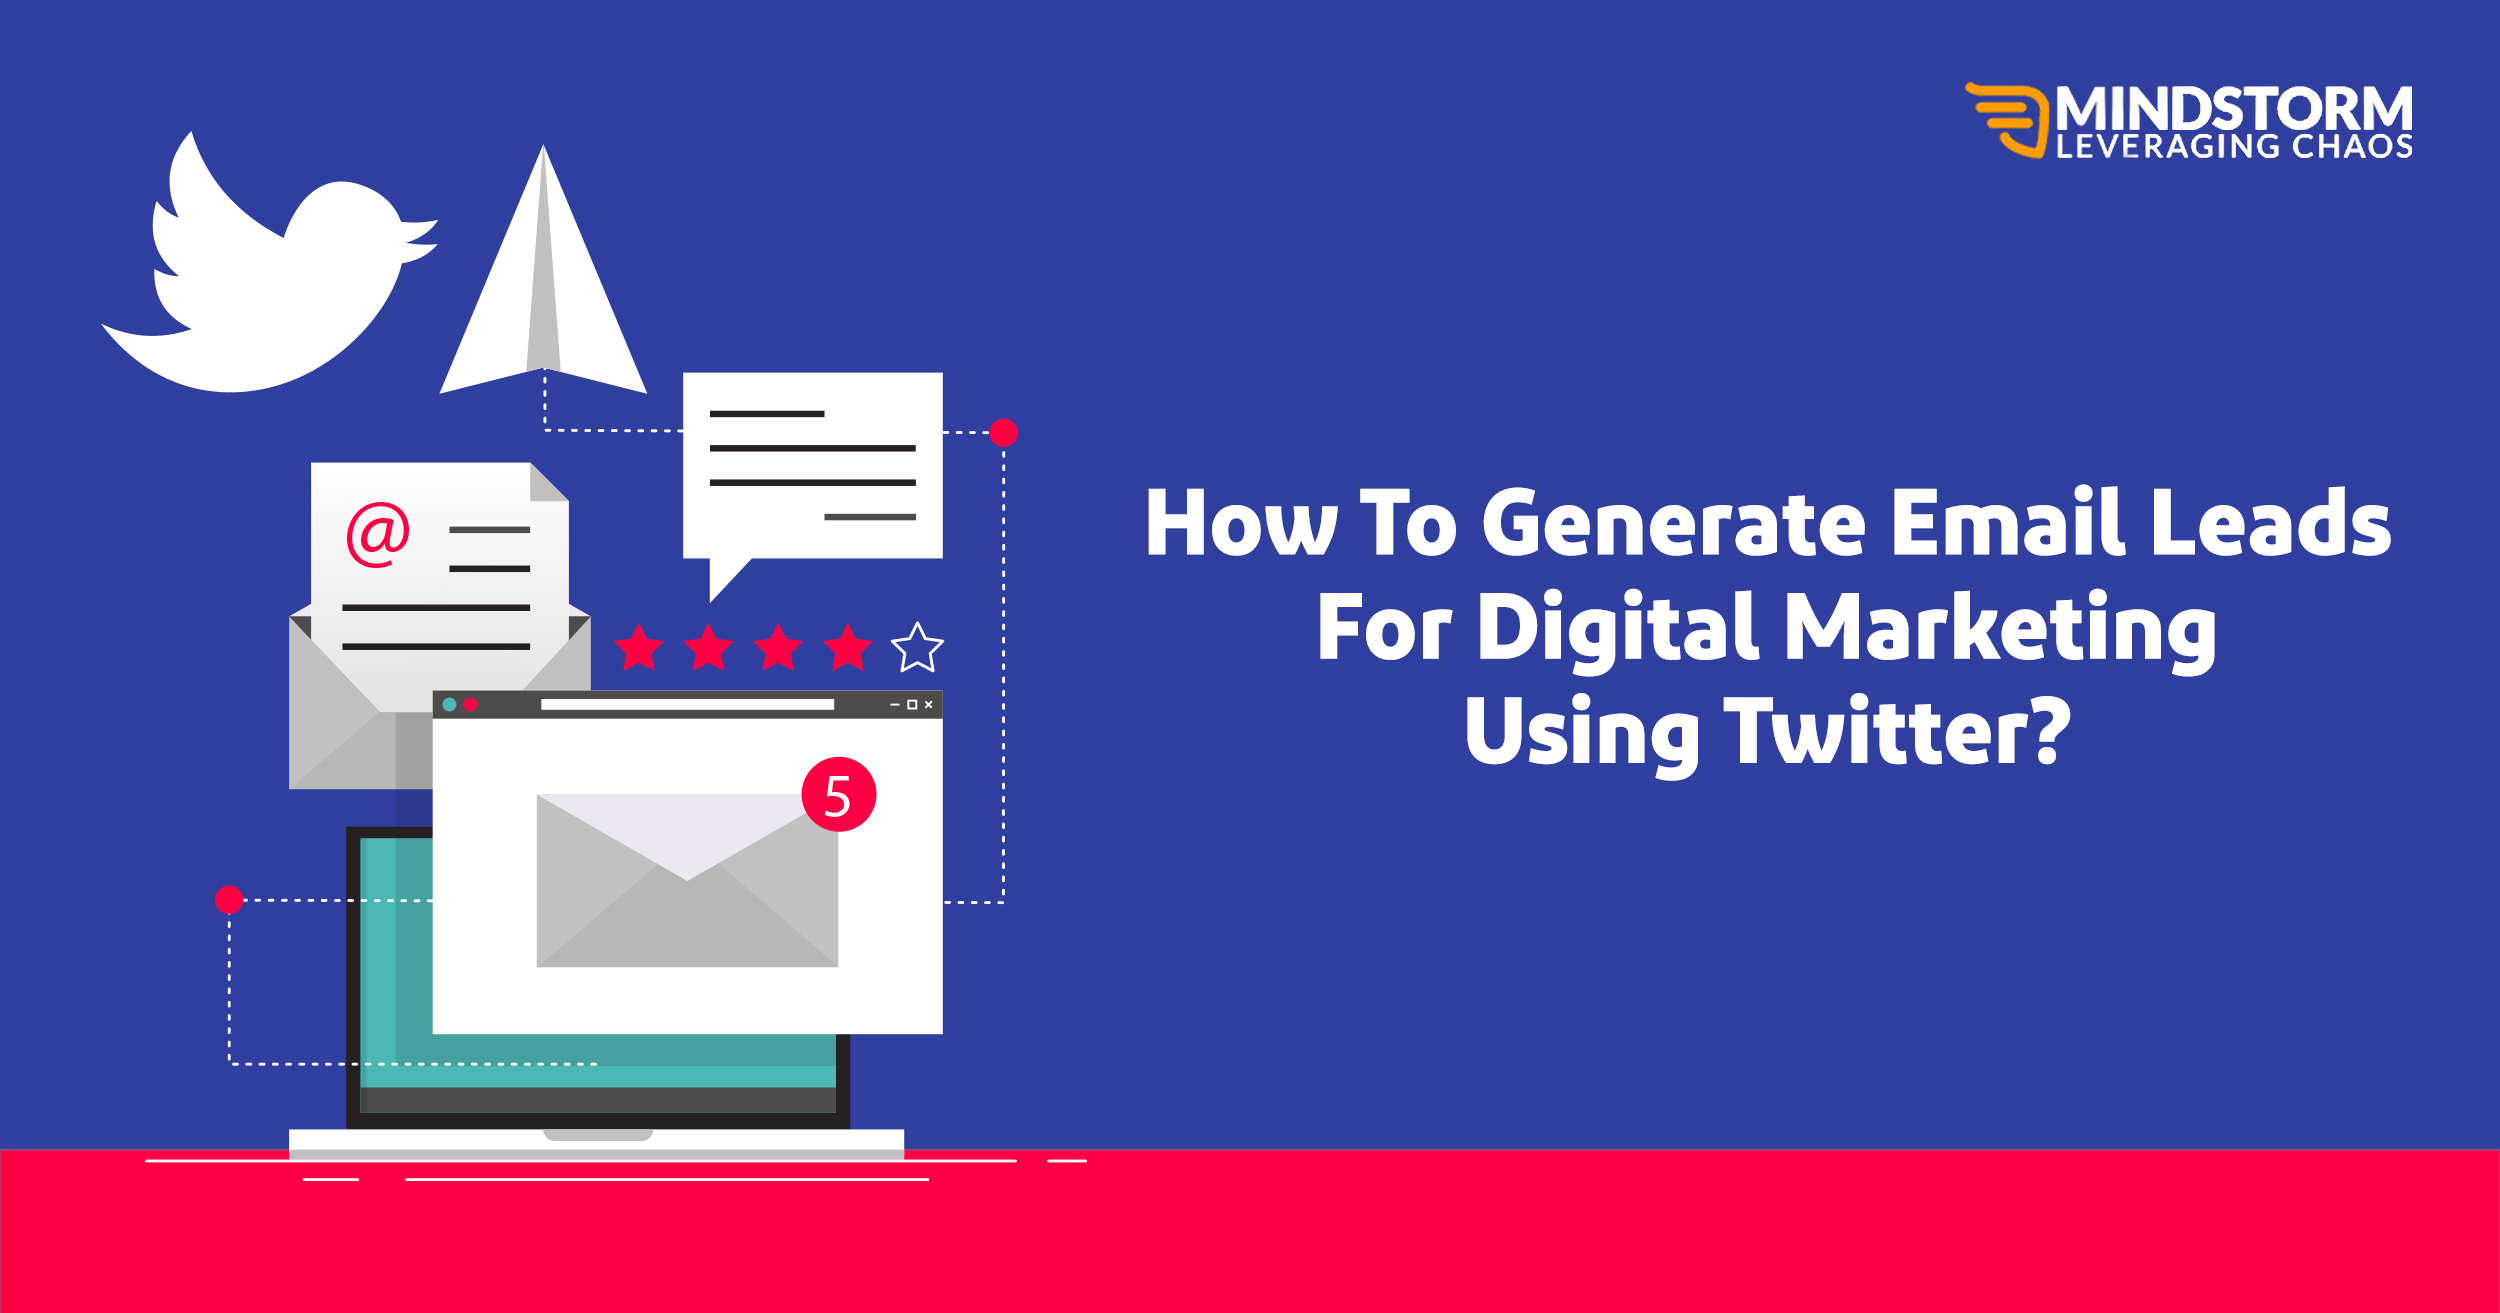 How to generate email leads for Digital Marketing using Twitter?